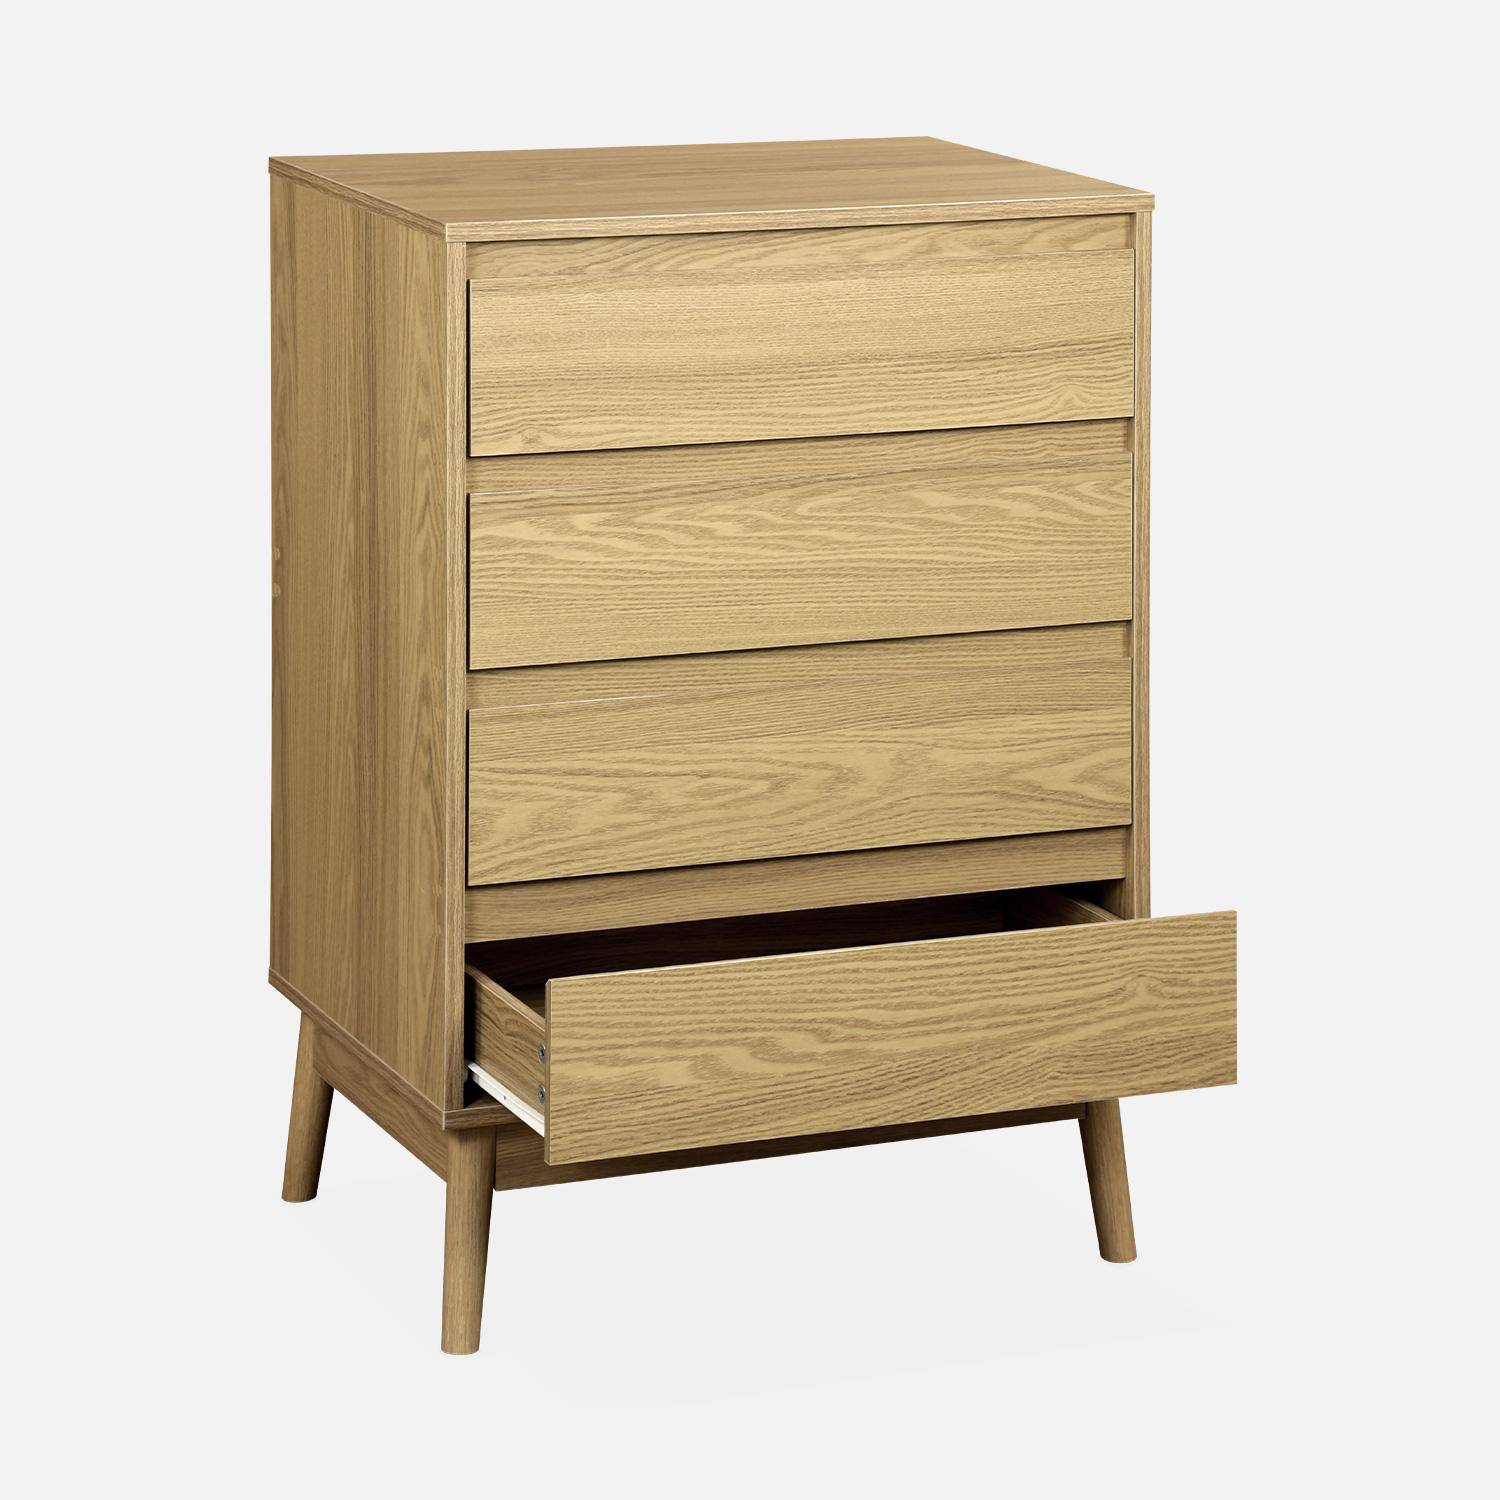 Wooden 4-drawer chest, 60x40x91cm - Dune - Natural wood colour Photo5